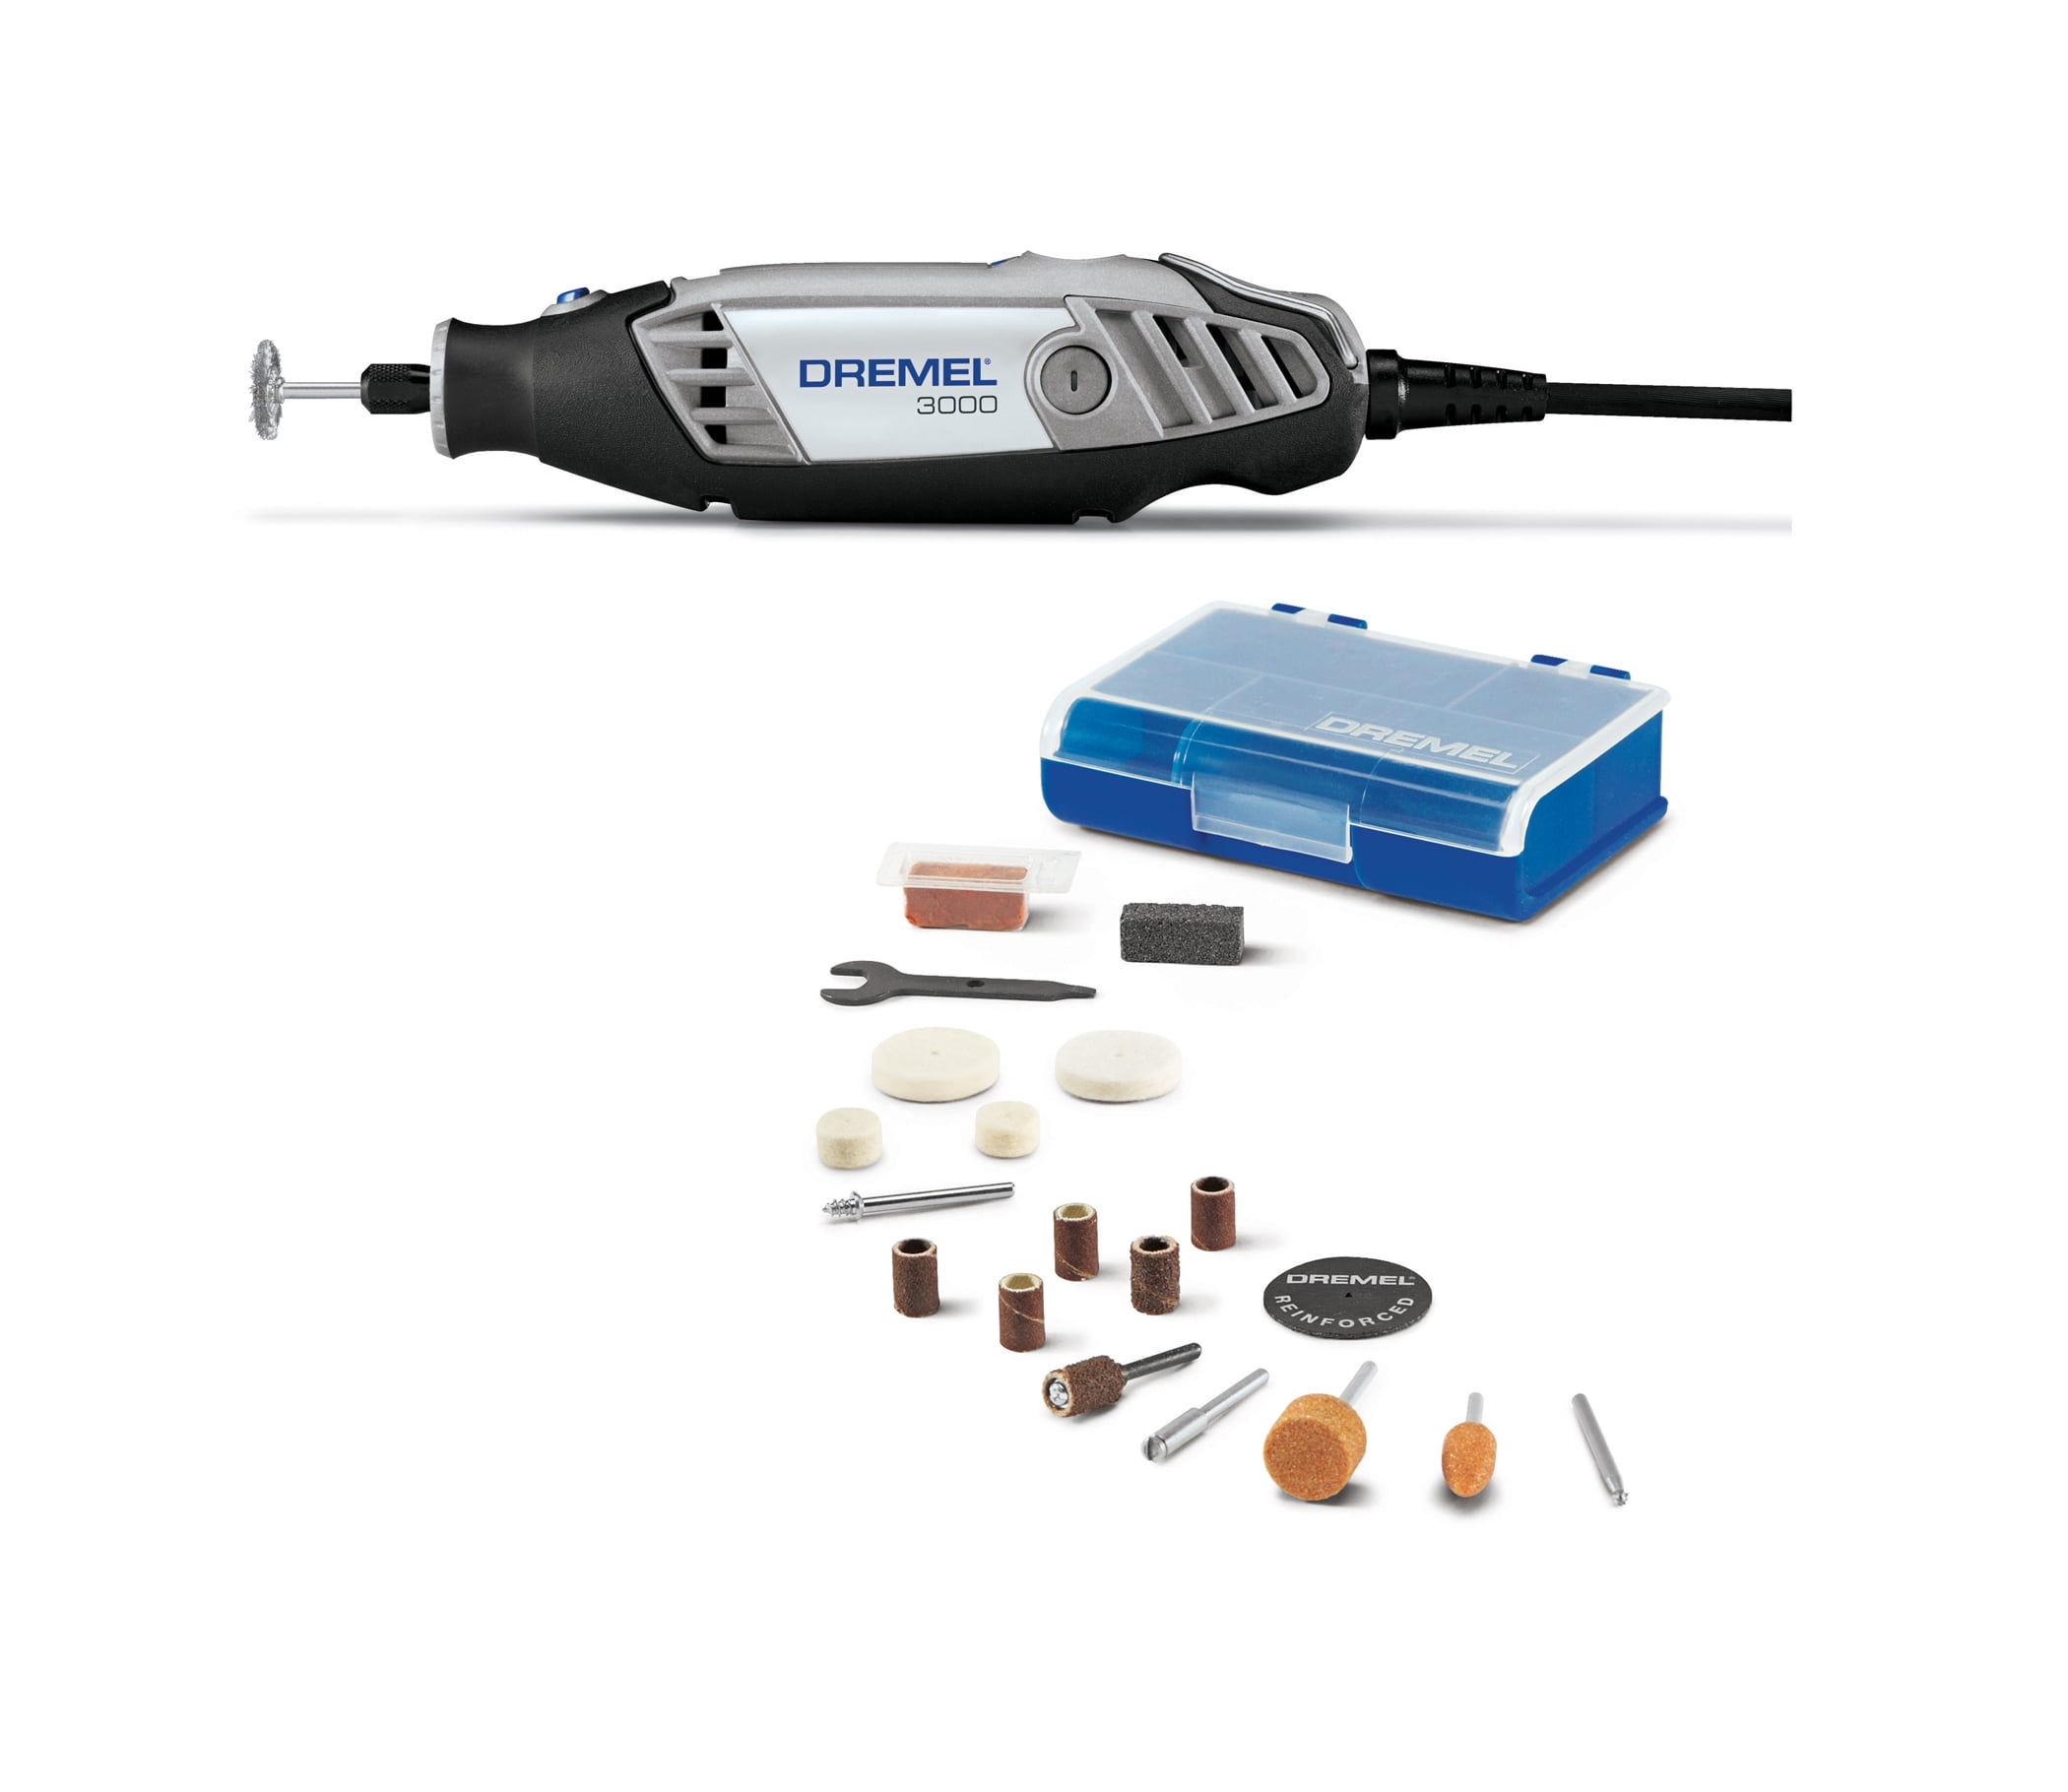 Dremel 7350-5 Cordless Rotary Tool Kit, Includes 4V Li-ion Battery and 7 Rotary  Tool Accessories - Ideal for Light DIY Projects and Precision Work 